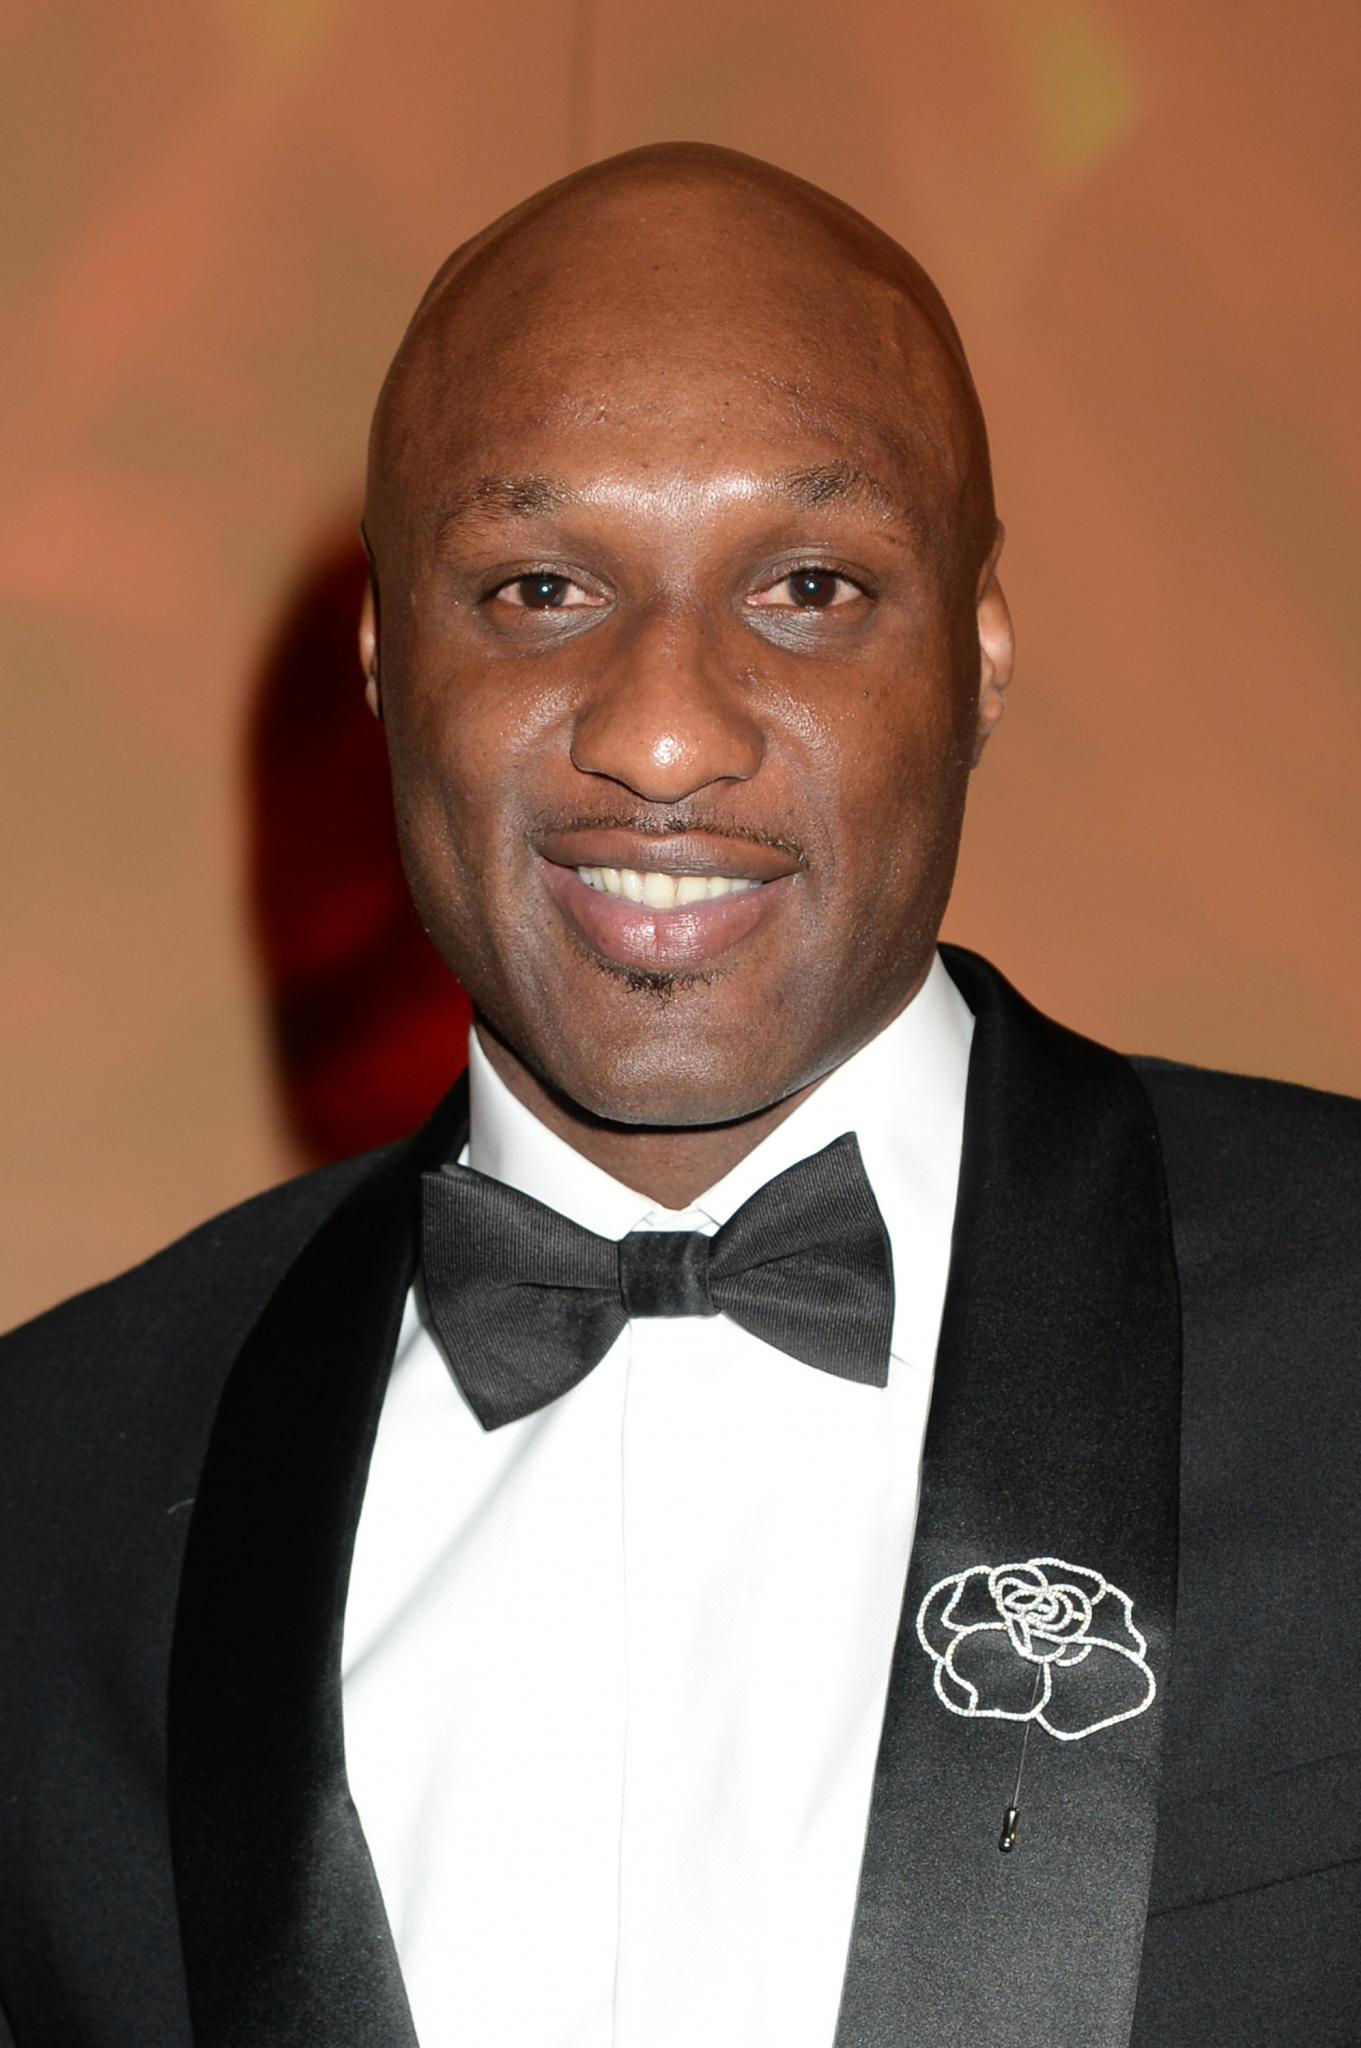 Lamar Odom to Star in New Reality Show 'About His Recovery': Source
